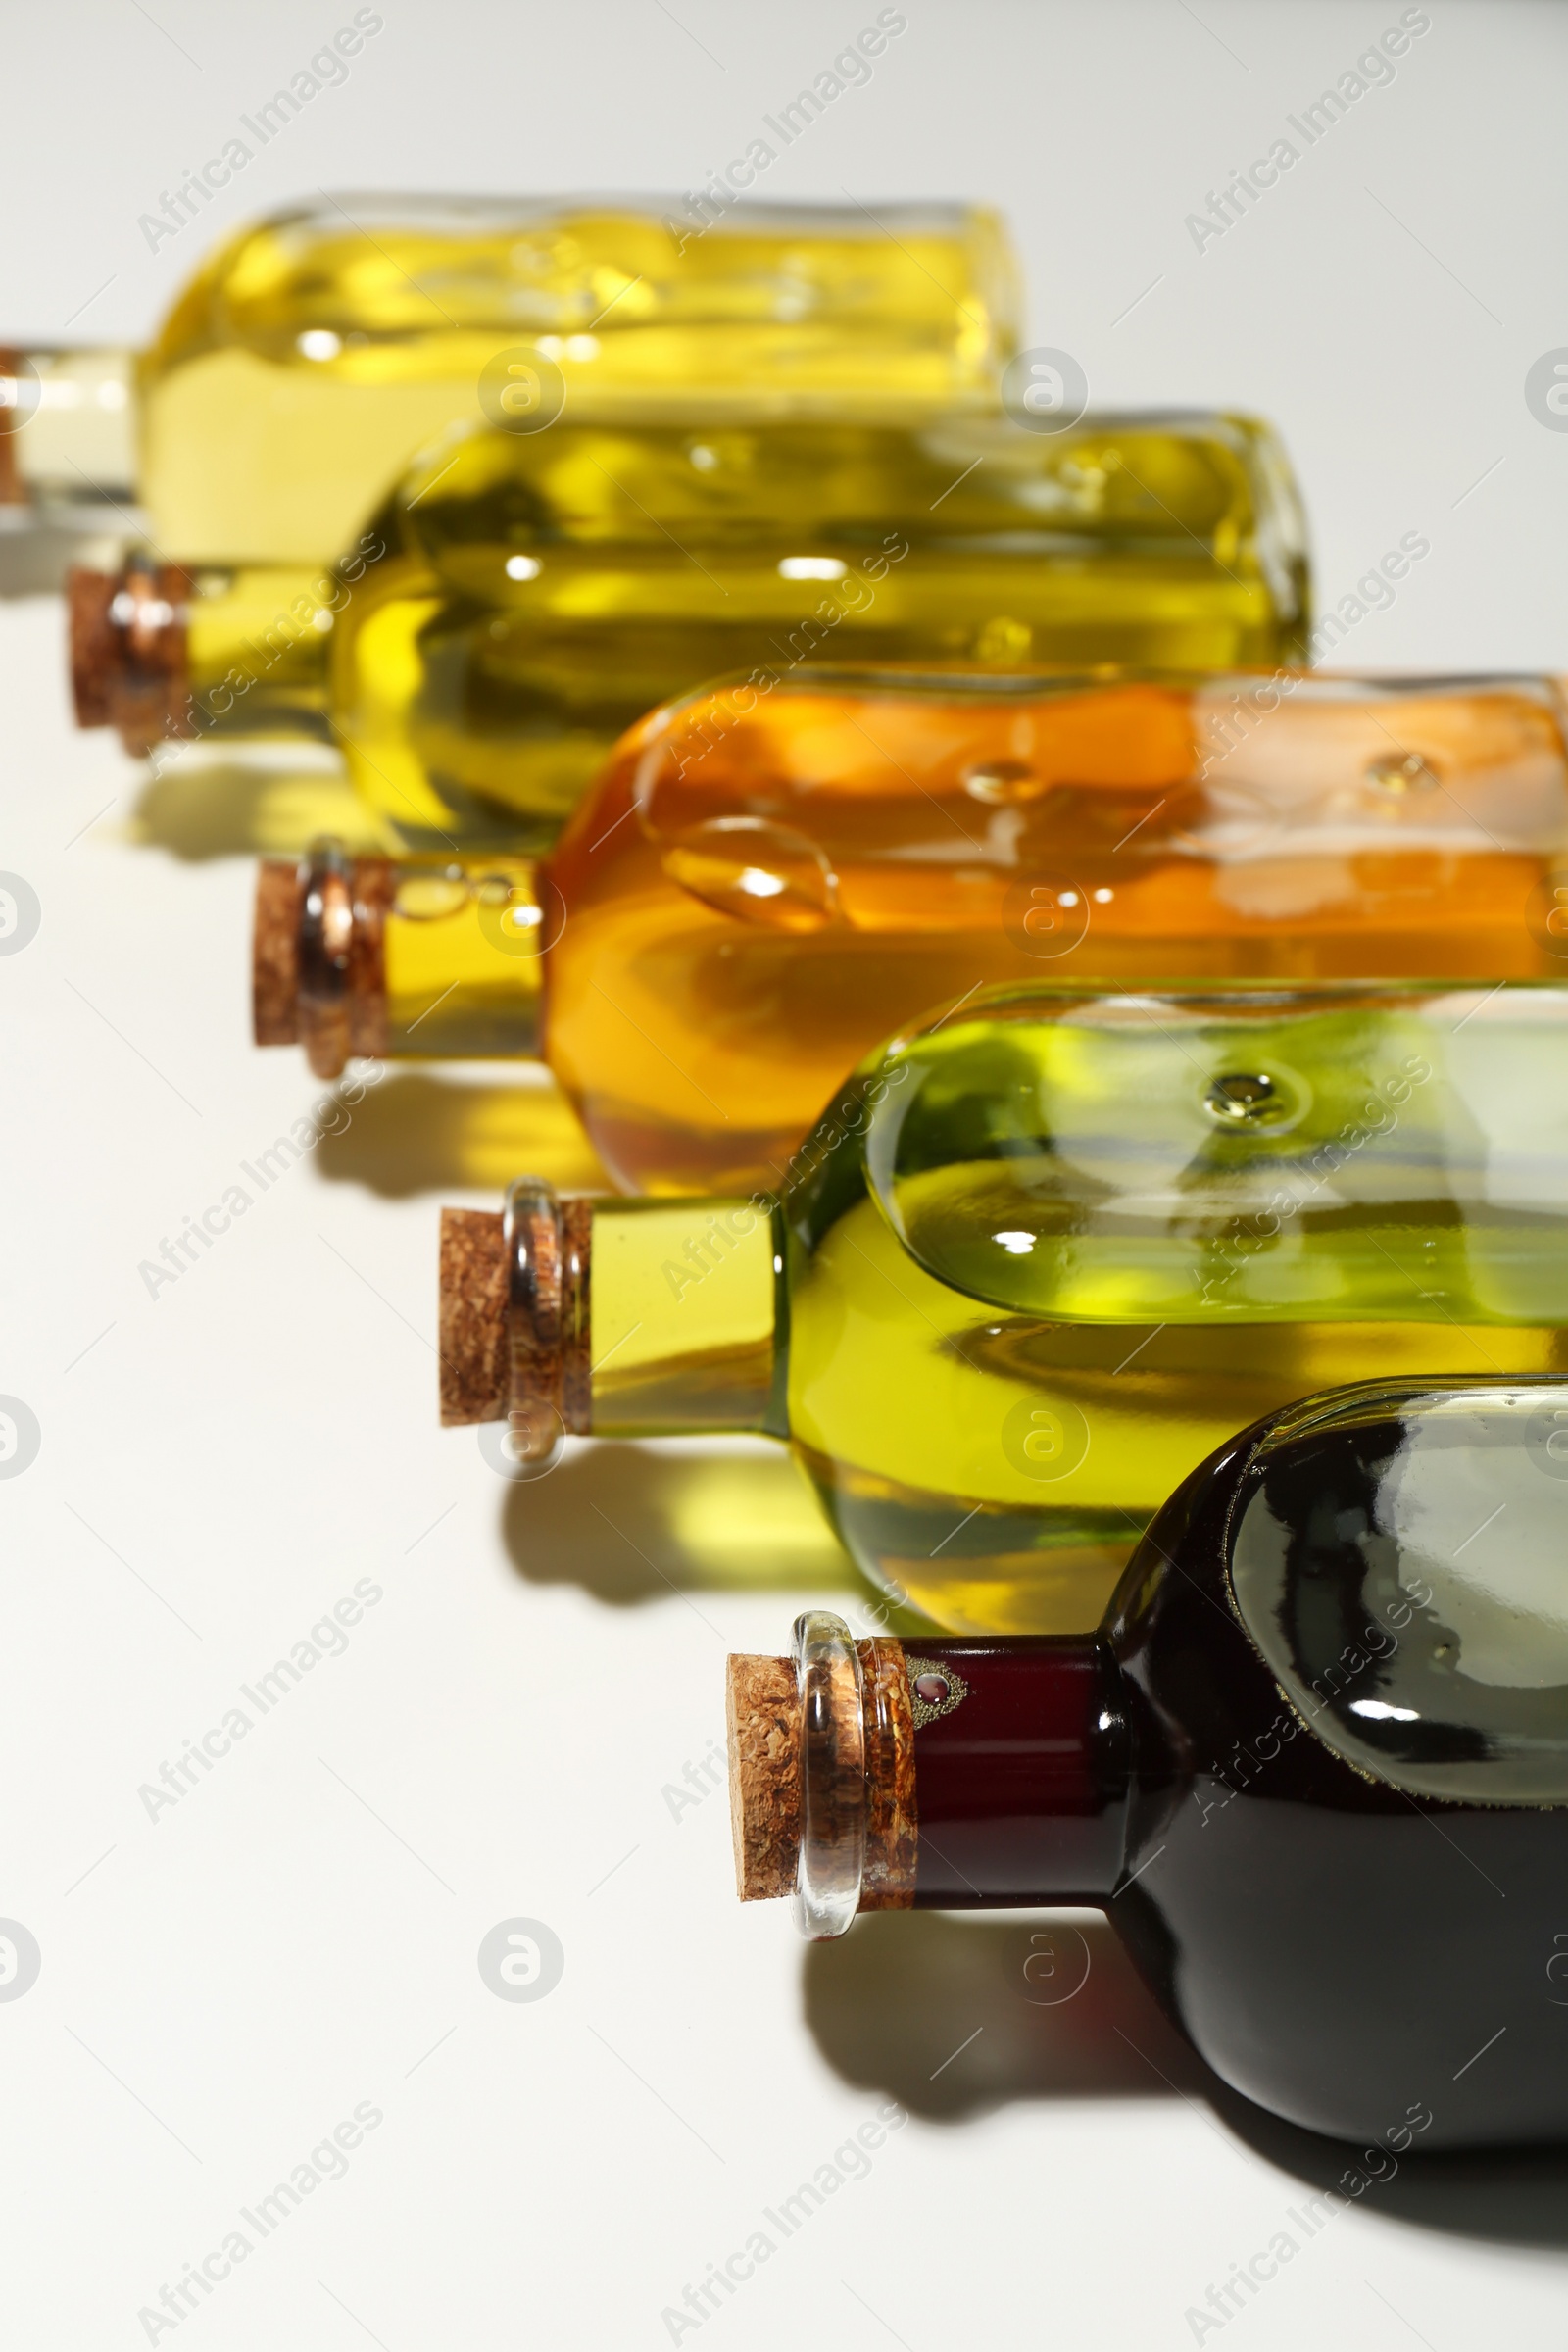 Photo of Vegetable fats. Different cooking oils in glass bottles on white background